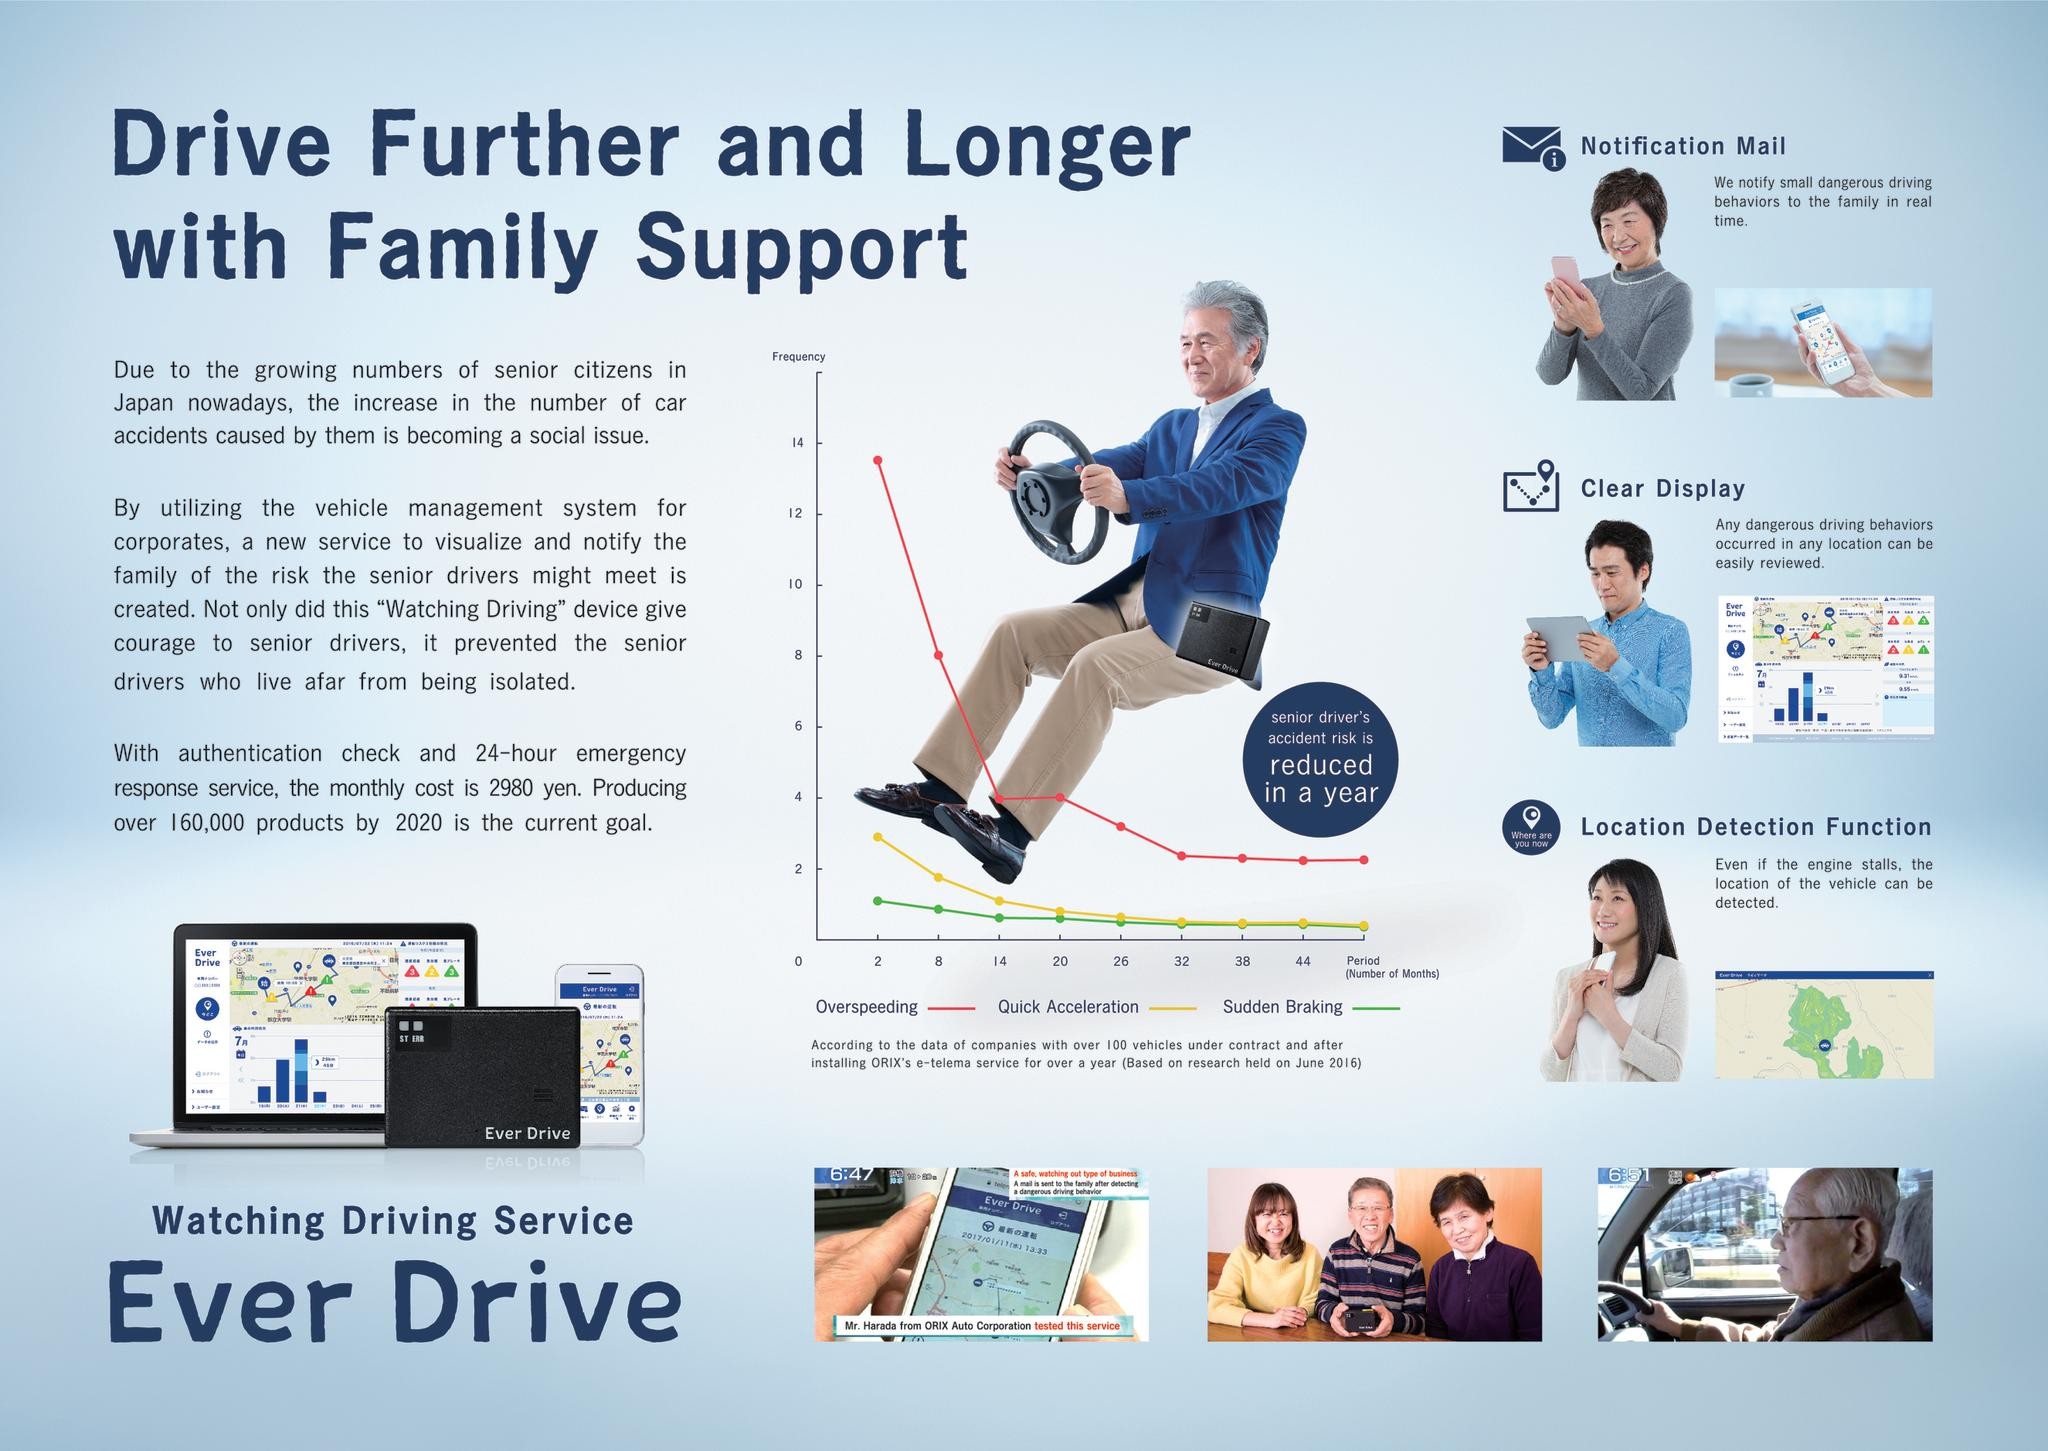 The driving life of the elderly can be prolonged by the support of their familie